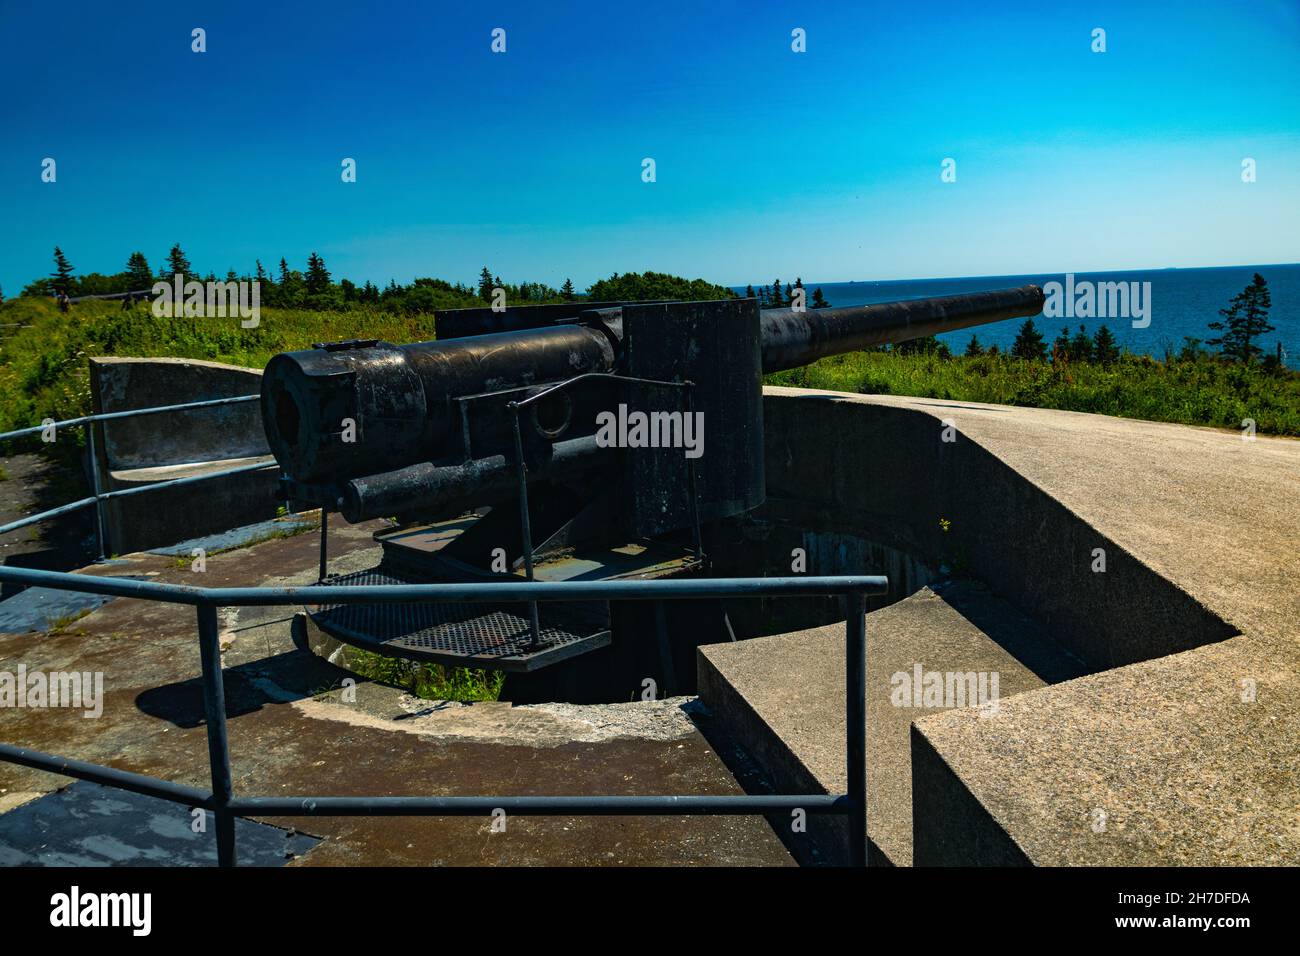 6-inch Mk VII Breechloading Gun (Serial No. l346) VS&M, 1900, in a gun emplacement at Fort McNab, facing out to sea. Stock Photo